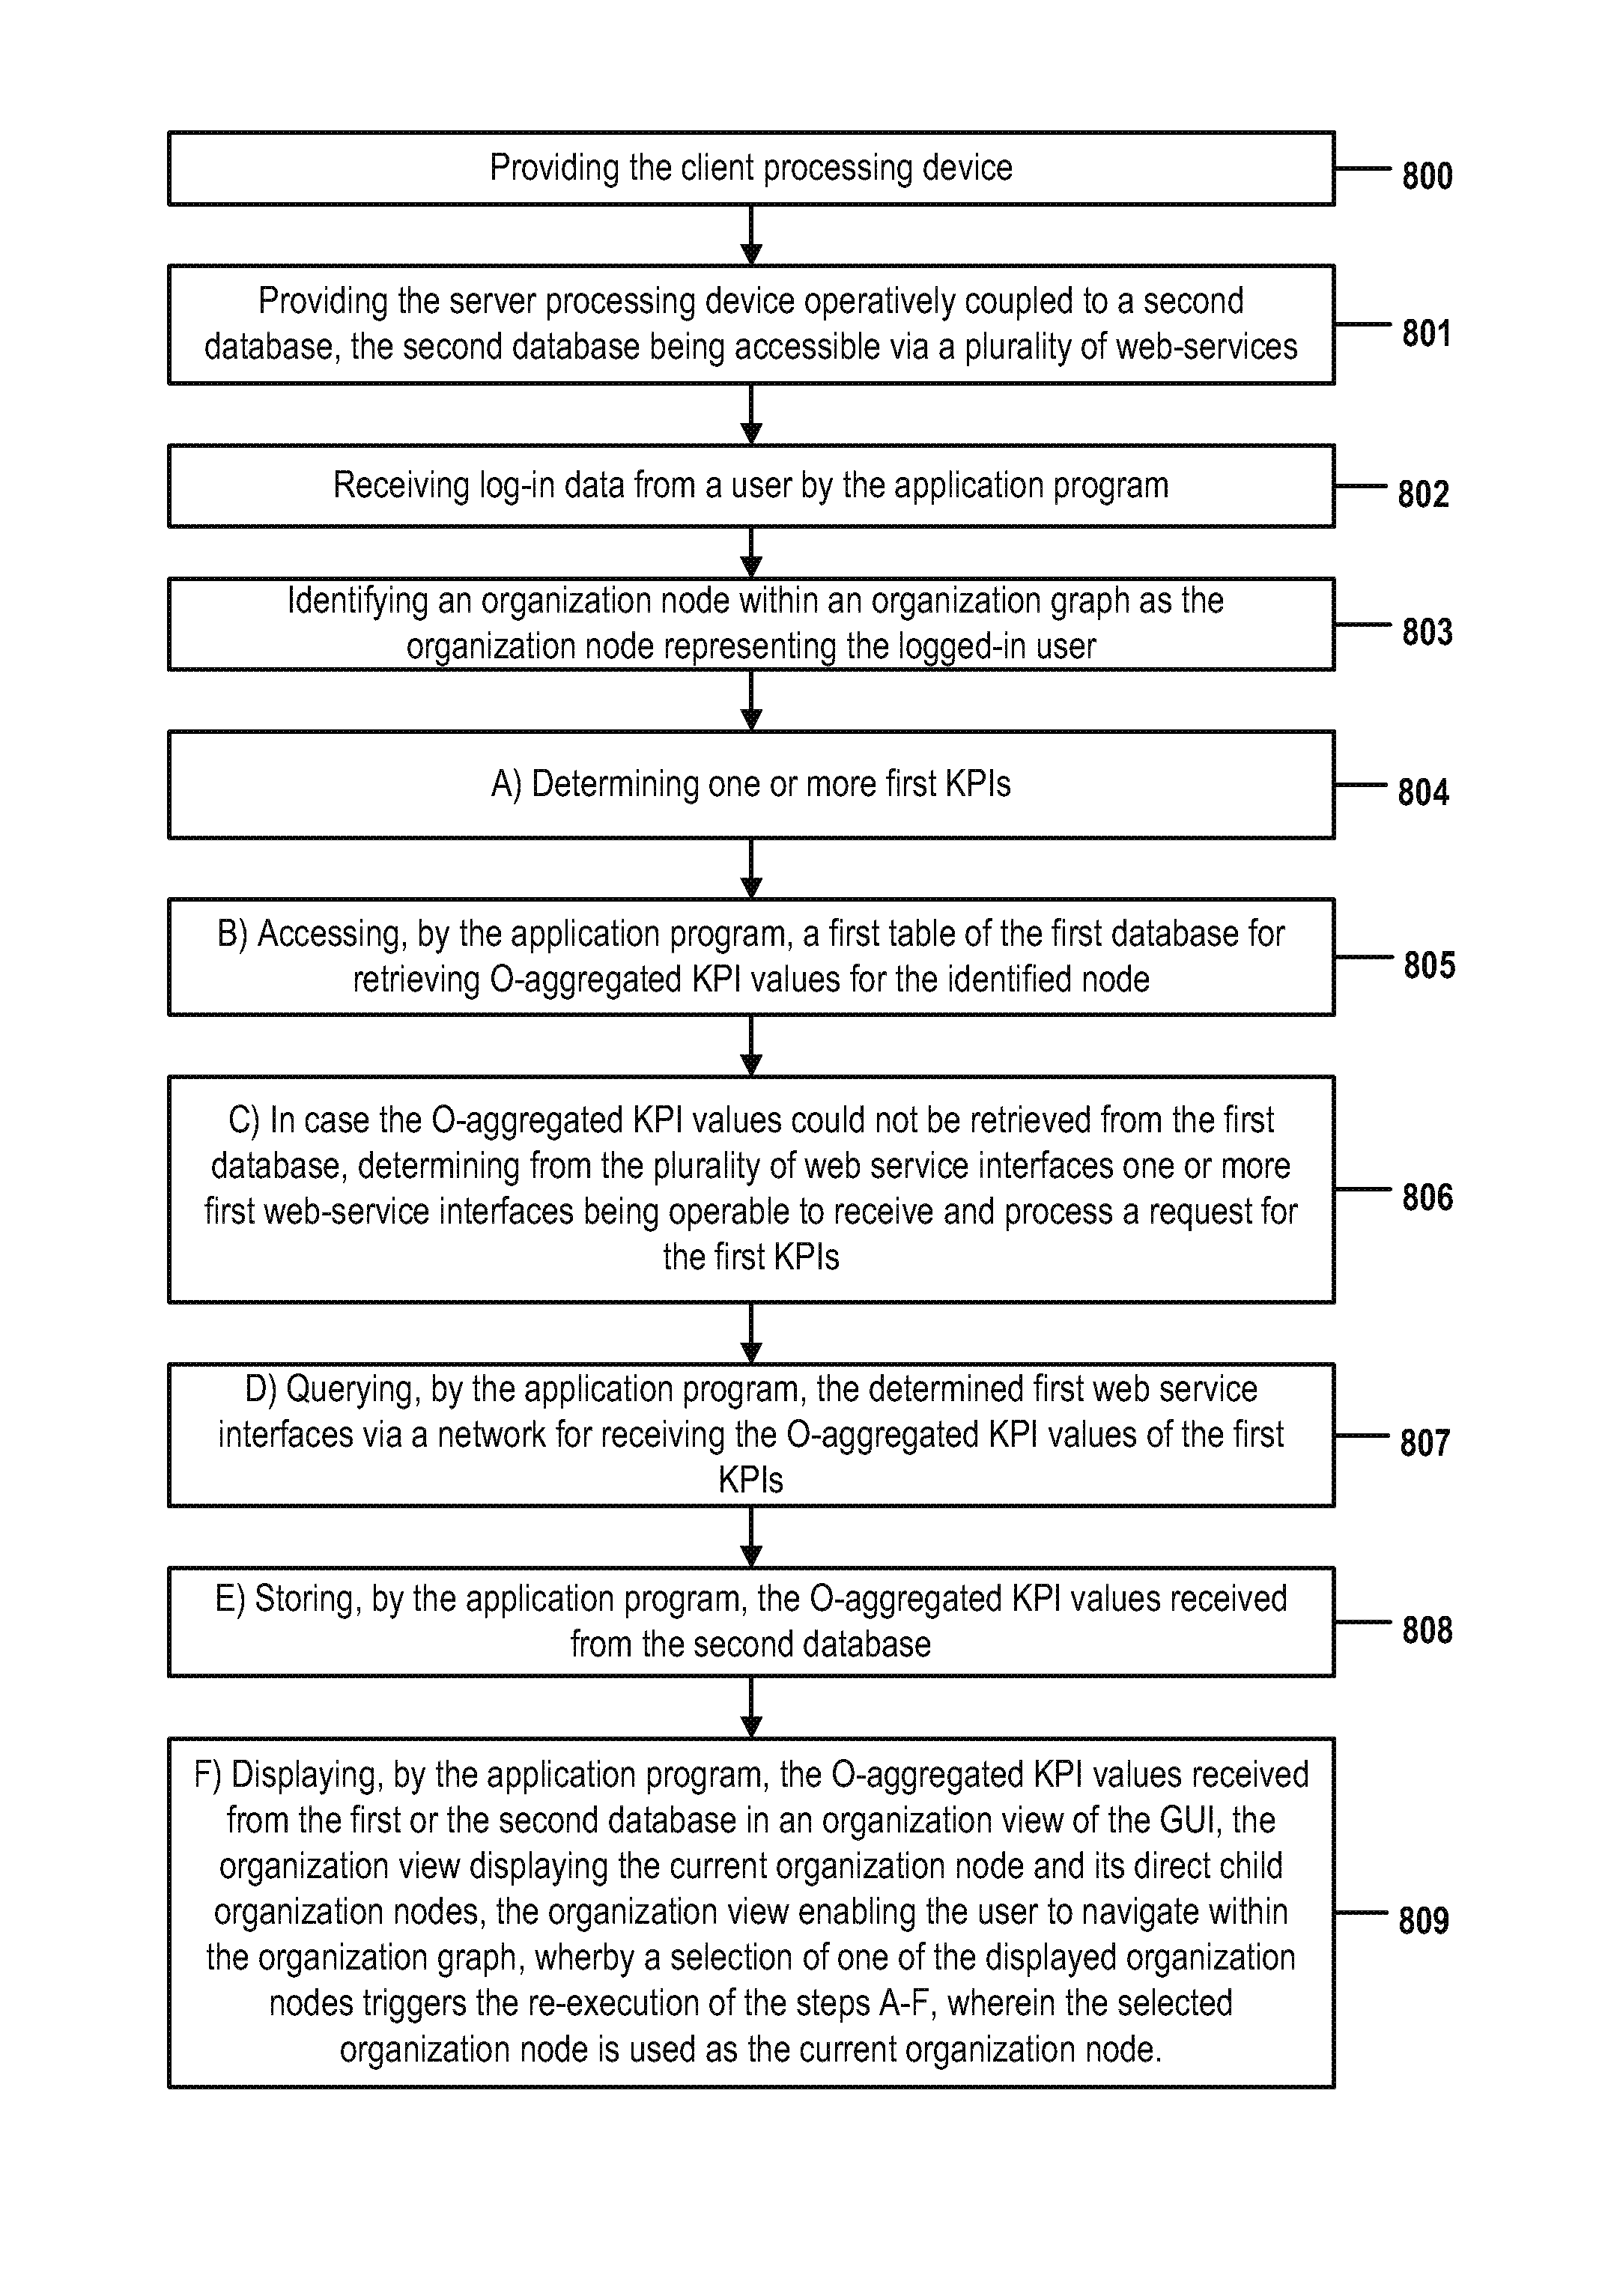 Computer-implemented method for specifying a processing operation